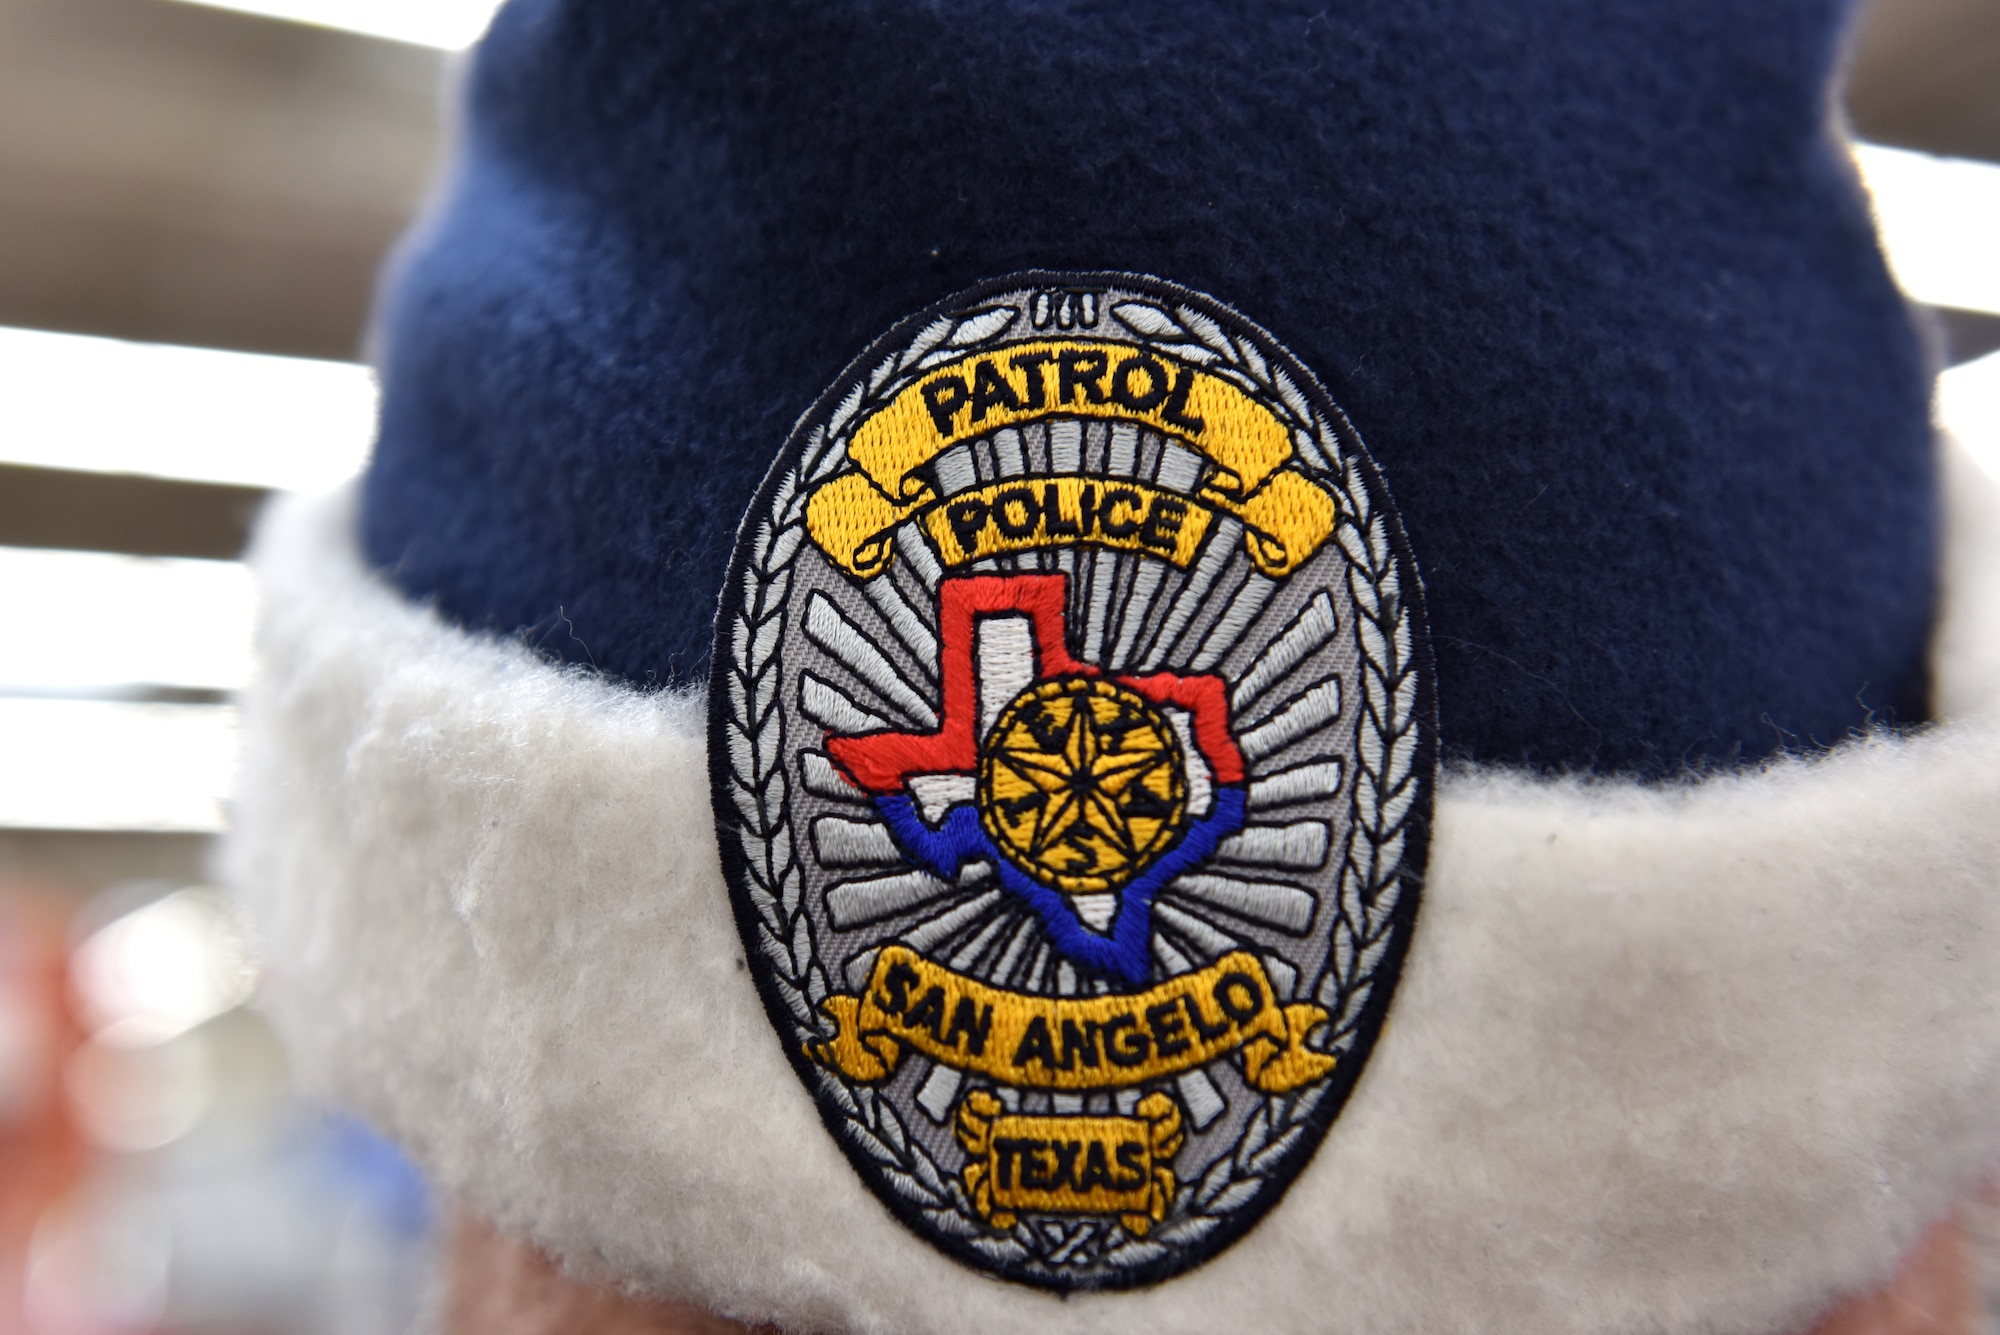 A police officer participating in Operation Blue Santa Shop with a Cop shows off his blue santa hat complete with a police badge in San Angelo, Texas, Dec. 14, 2019. This year there were multiple groups of children who shopped for their families with the police officers. (U.S. Air Force photo by Senior Airman Seraiah Wolf)